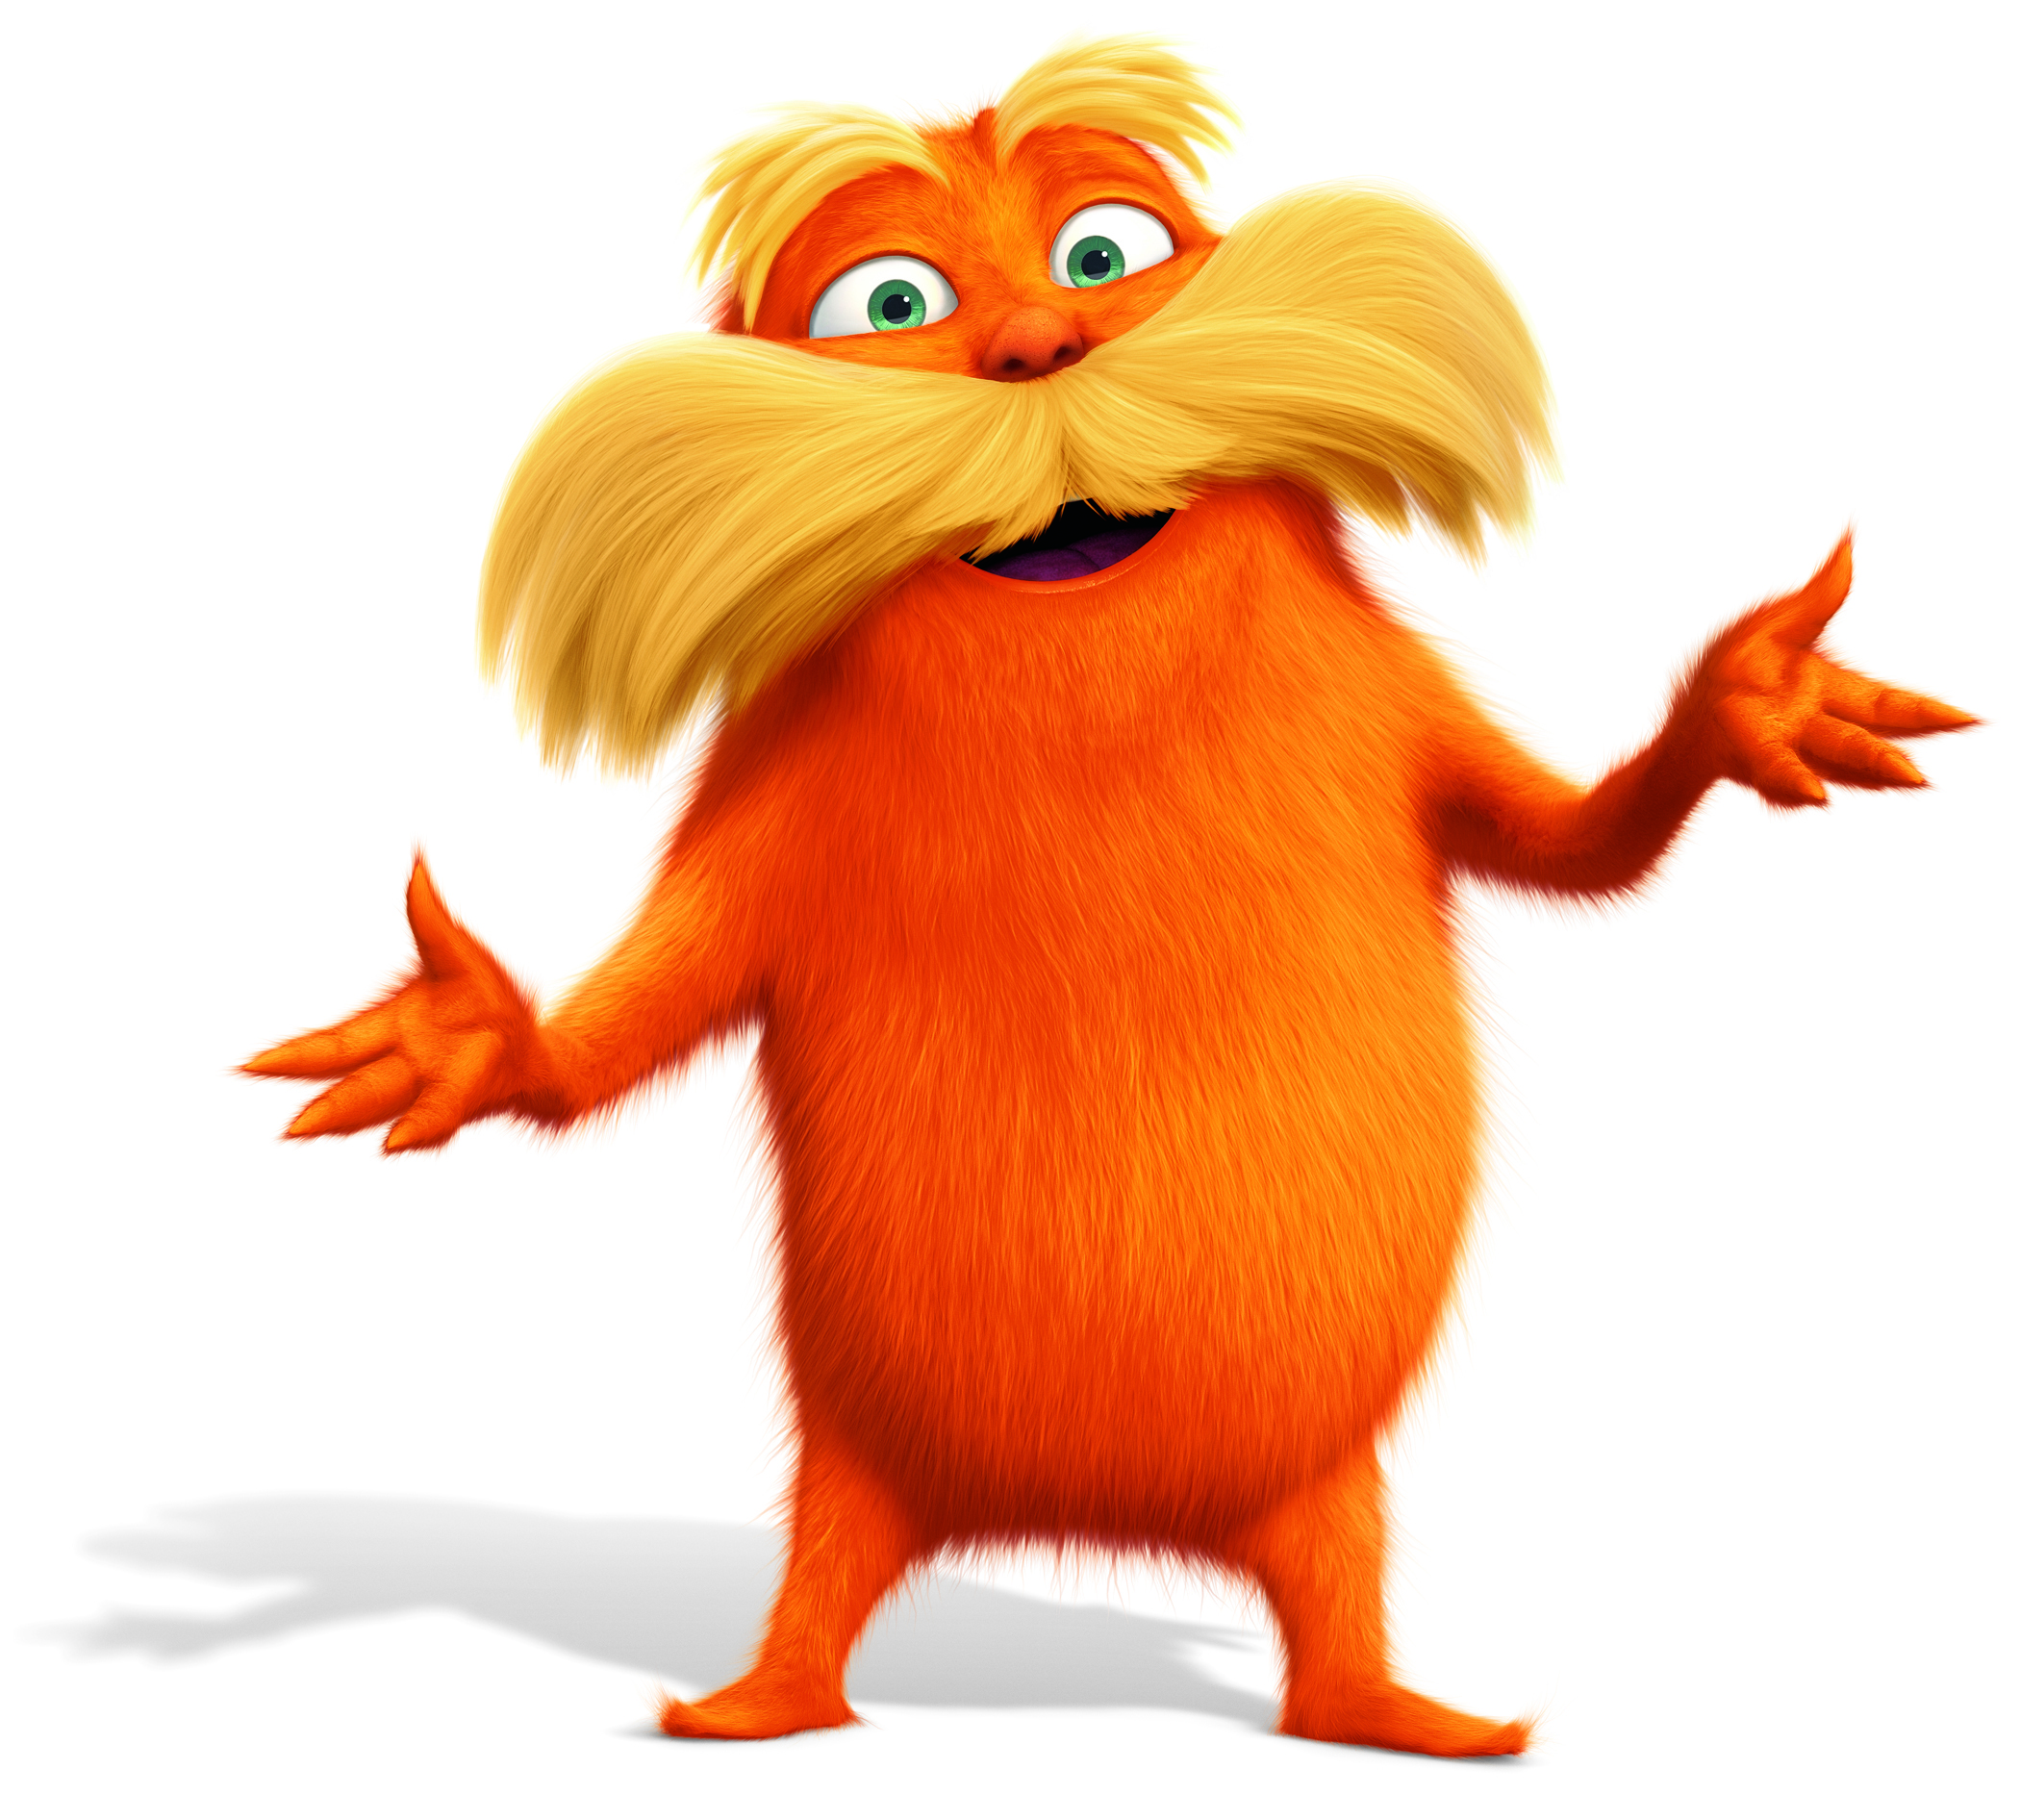 The Lorax - “Unless someone like you cares a whole awful lot, nothing is going to get better. It's not.”